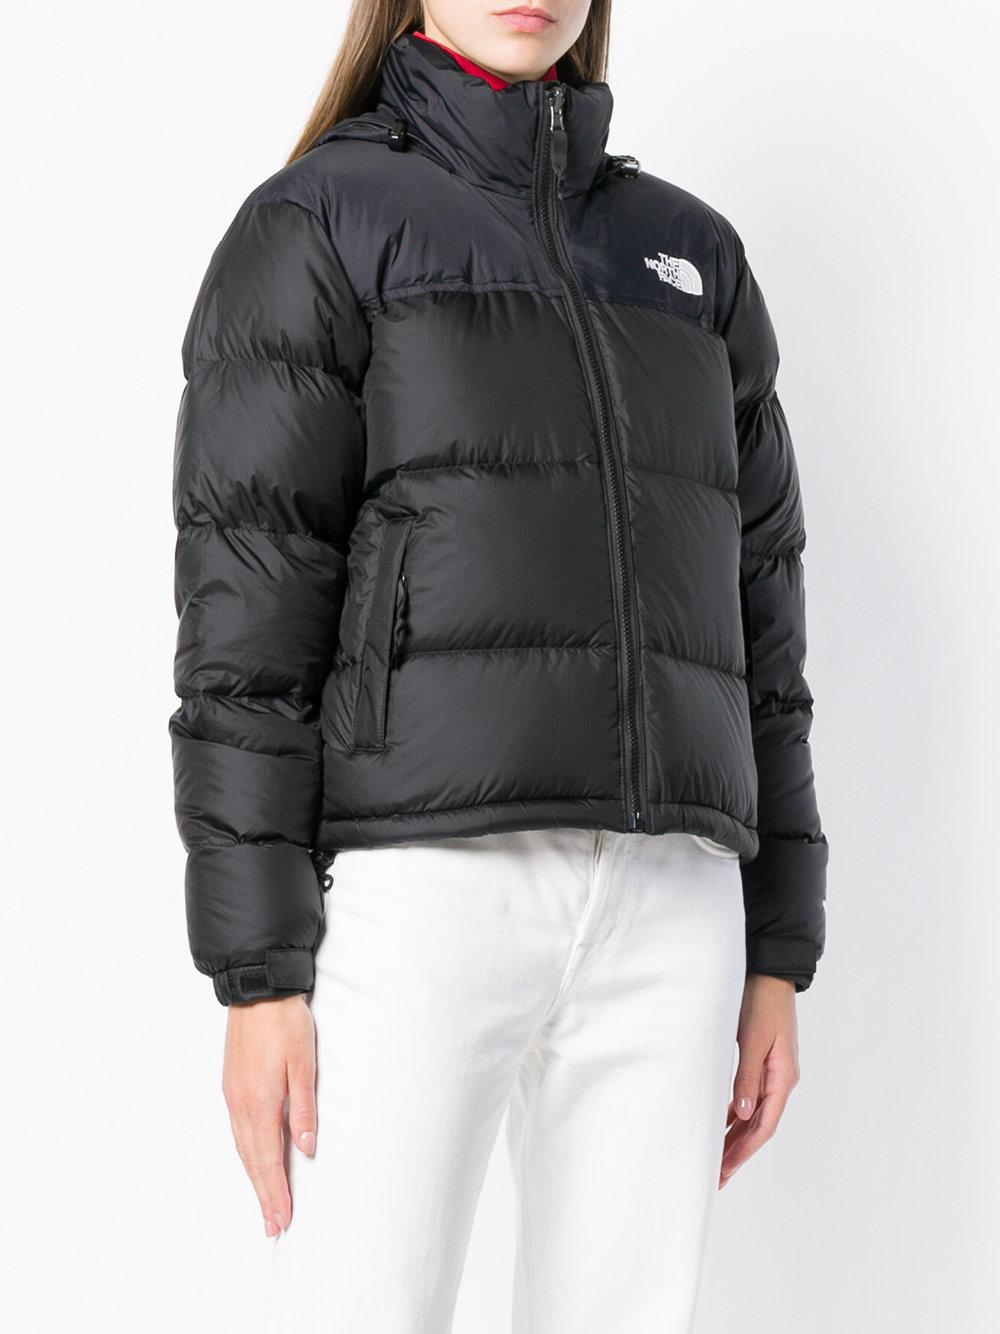 The North Face Cropped Jacket Online Shopping For Women Men Kids Fashion Lifestyle Free Delivery Returns